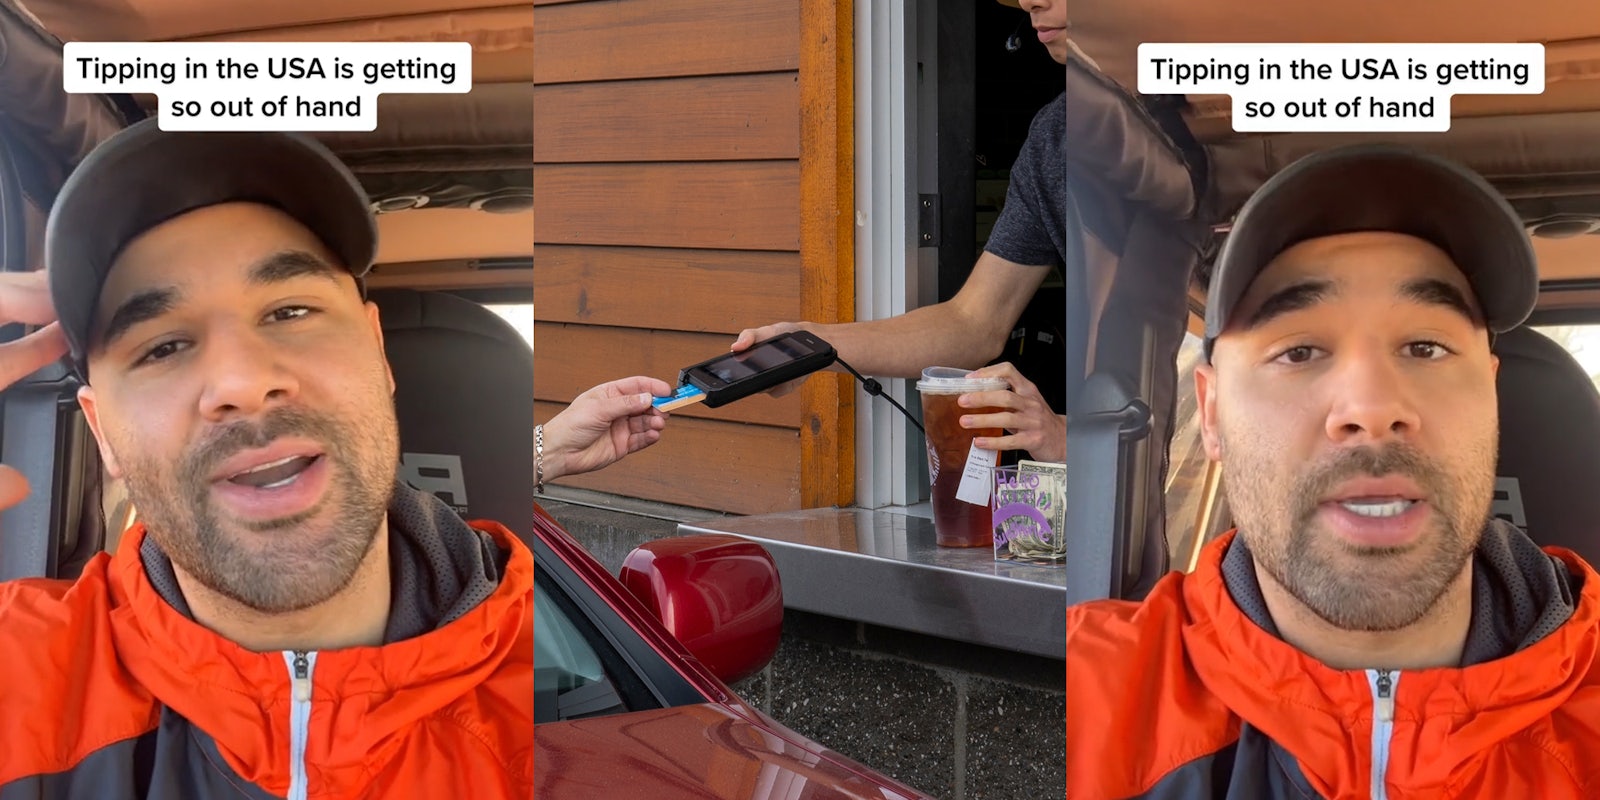 man speaking in car caption 'Tipping in the USA is getting so out of hand' (l) person paying with card at drive thru (c) man speaking in car caption 'Tipping in the USA is getting so out of hand' (r)